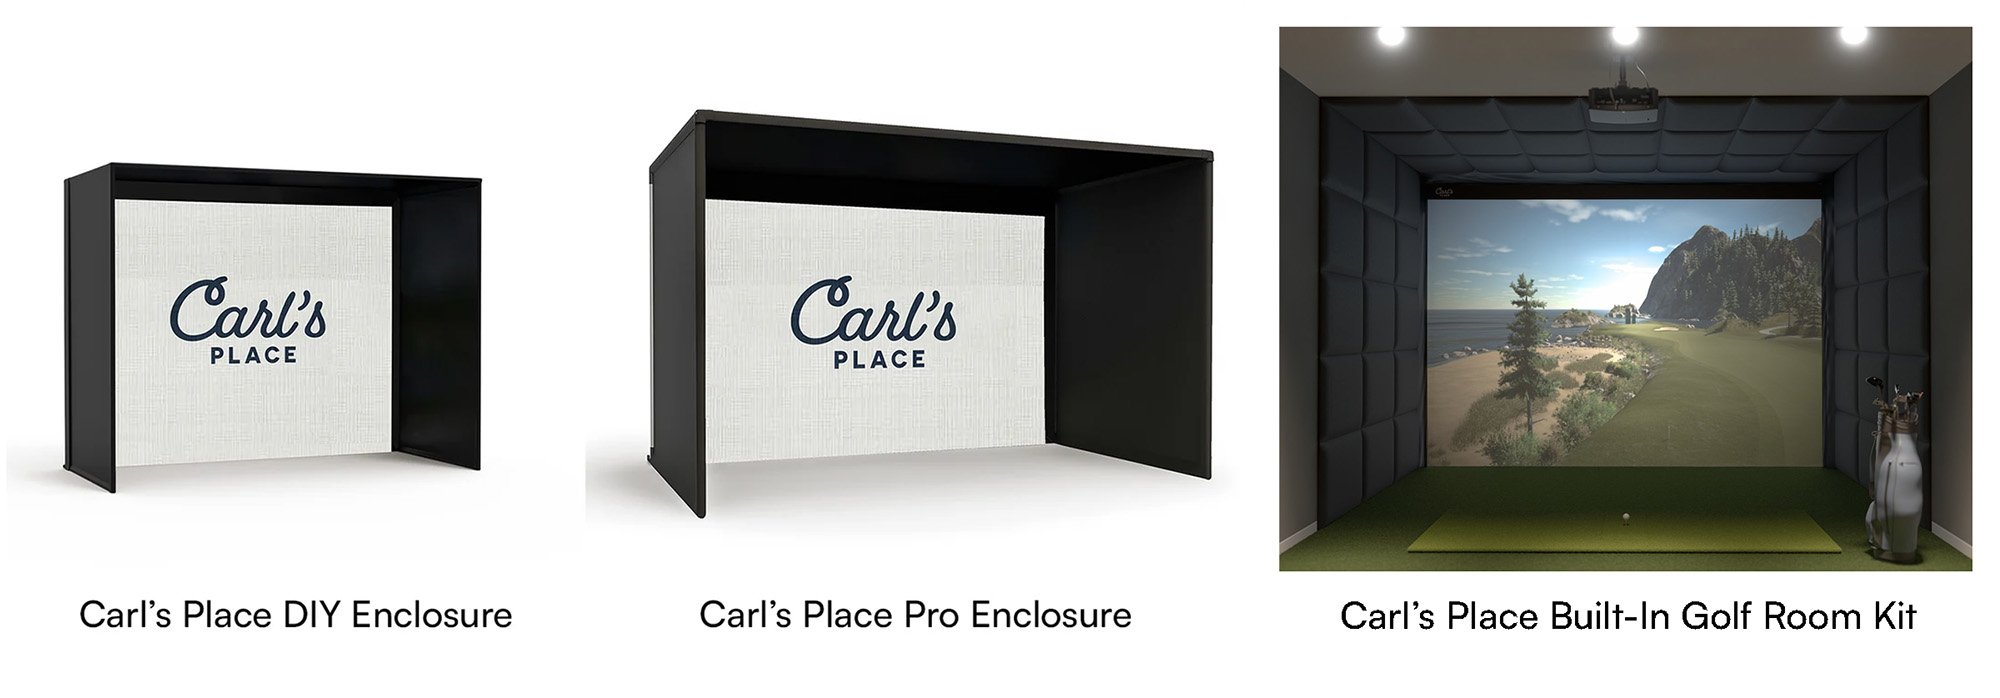 DIY vs. Pro vs. Built-In: Which golf enclosure is best for your space?